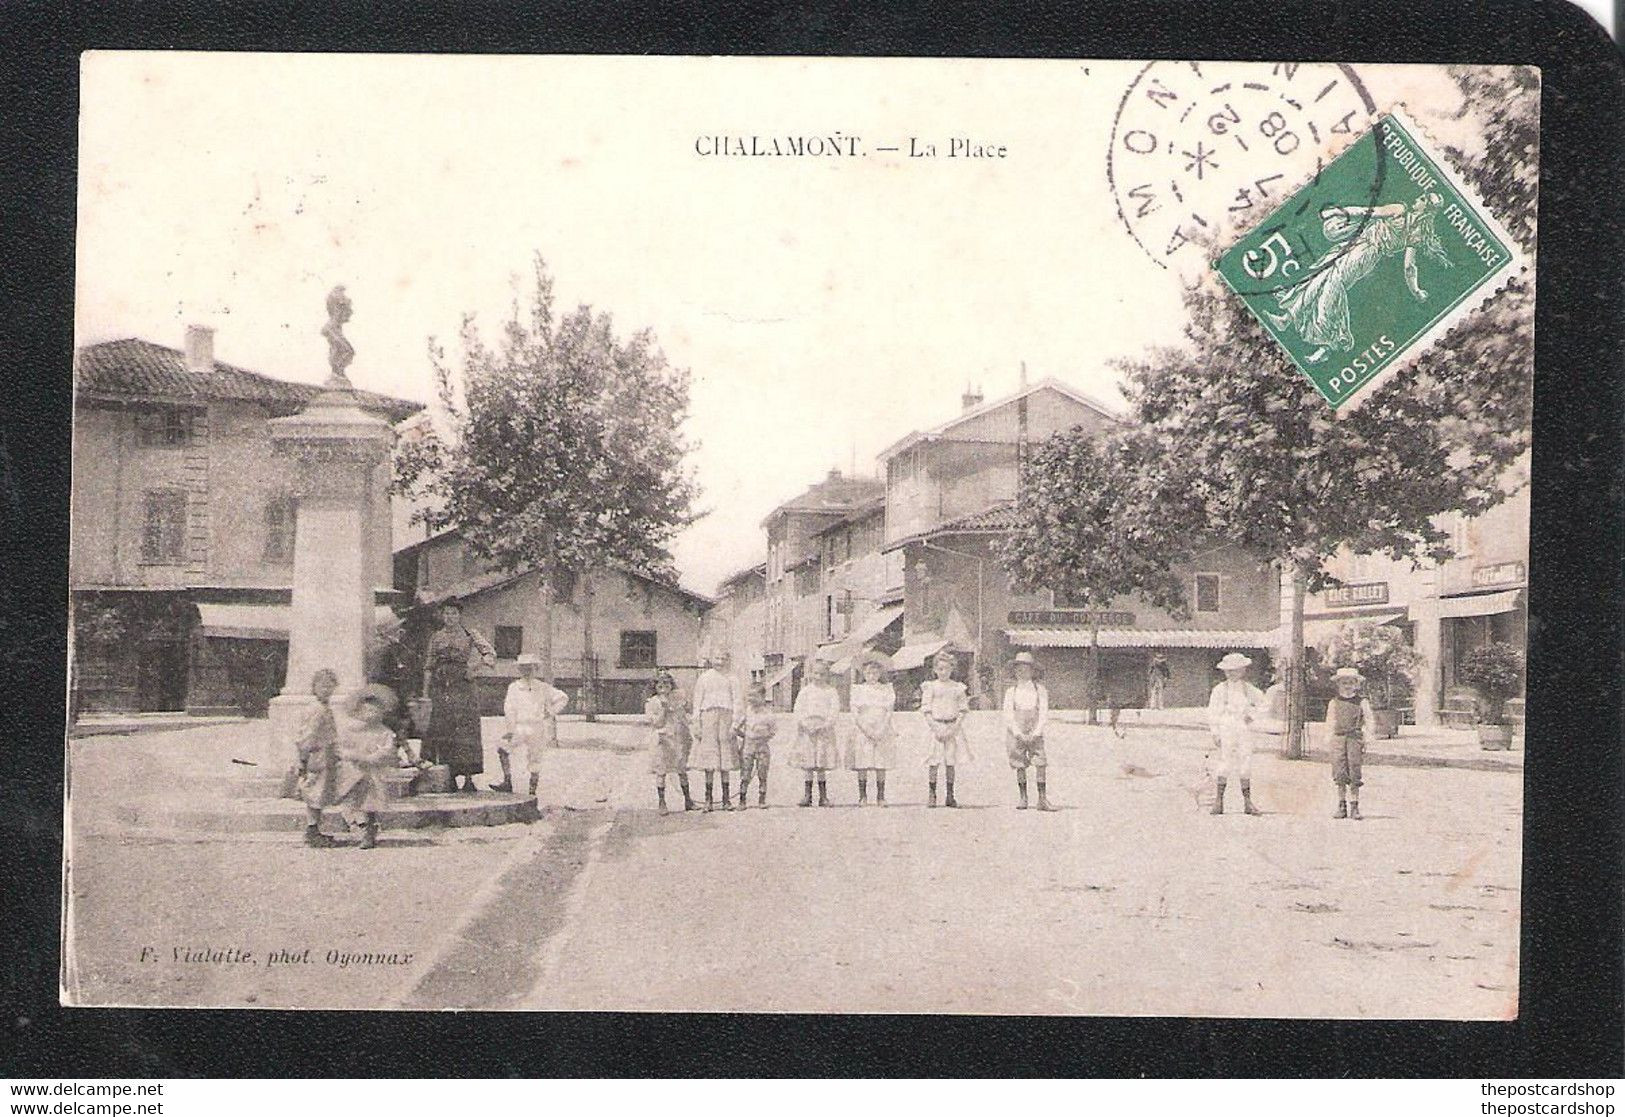 CPA 01 CHALAMONT-La Place F.VIALATTE PHOT OYONNAX RARE MORE FRANCE FOR SALE @1 EURO OR LESS - Unclassified